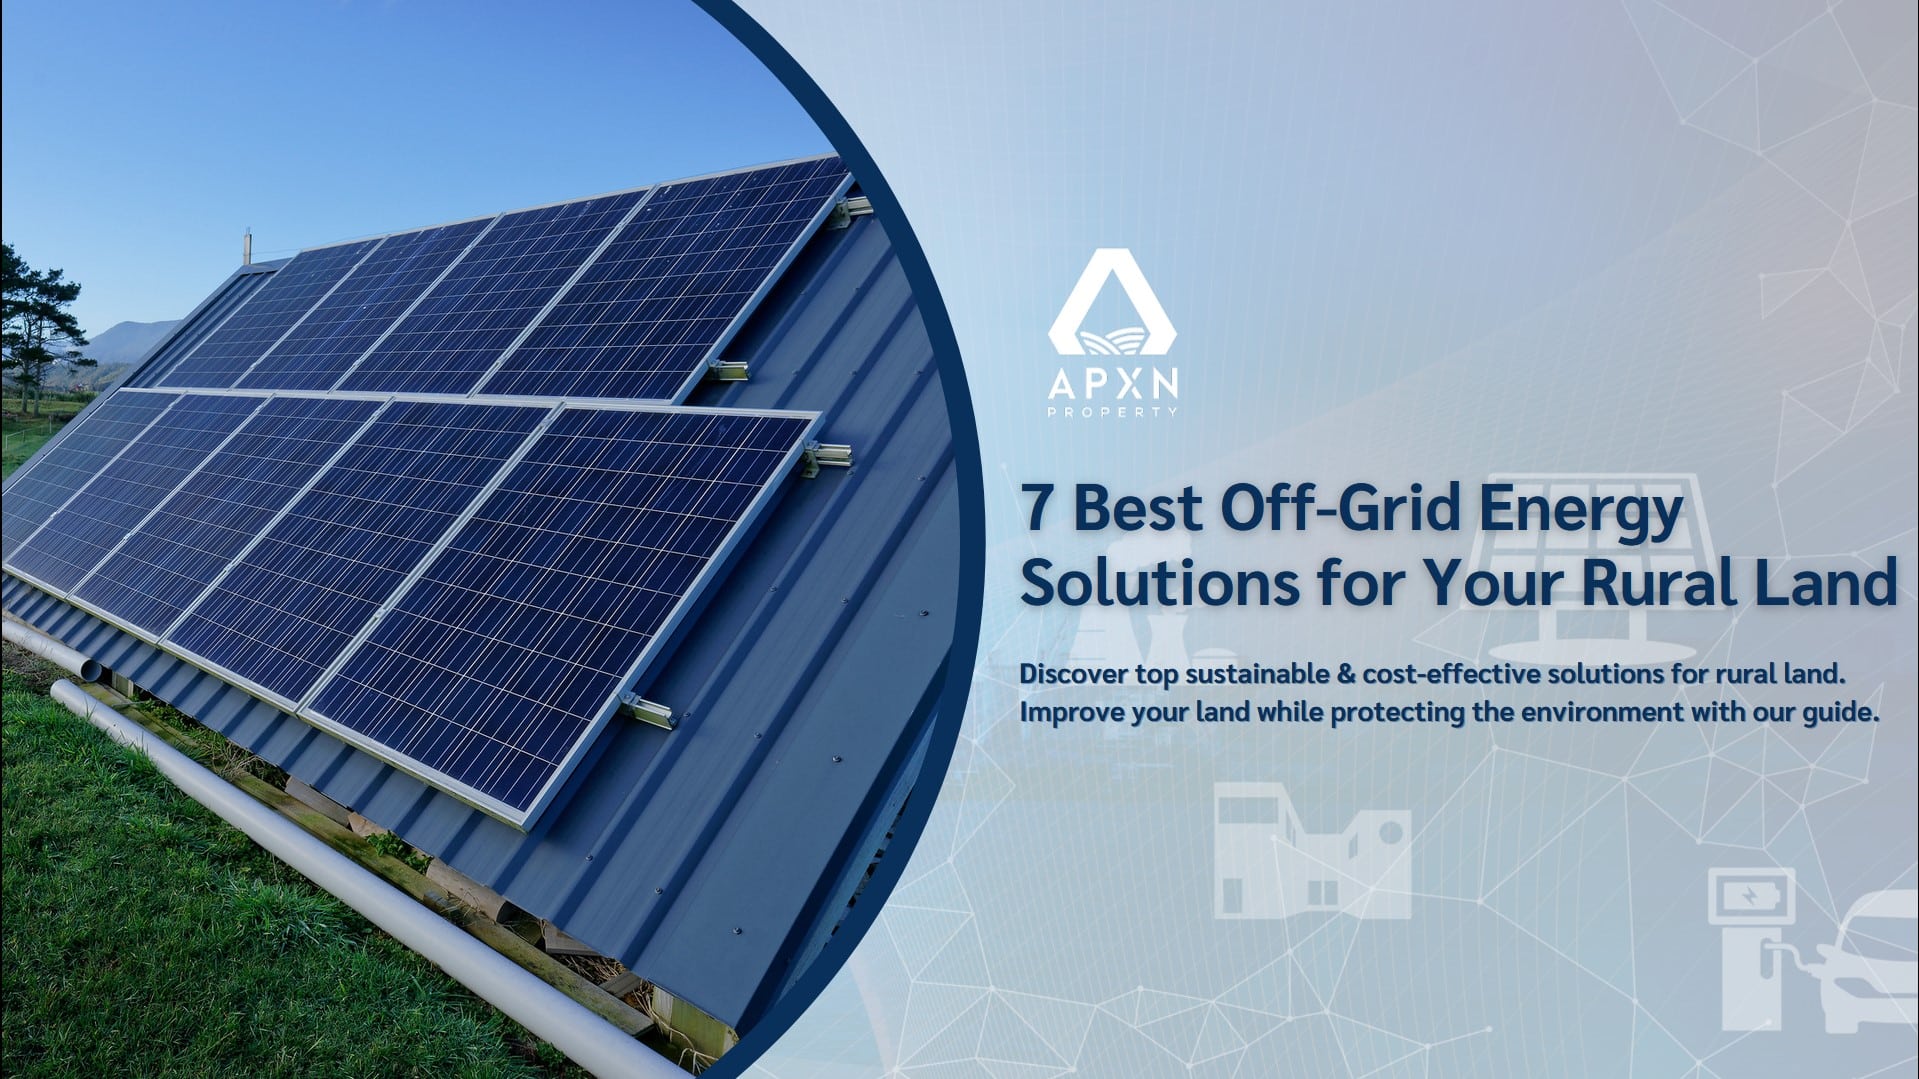 7 Best Off-Grid Energy Solutions for Your Rural Land